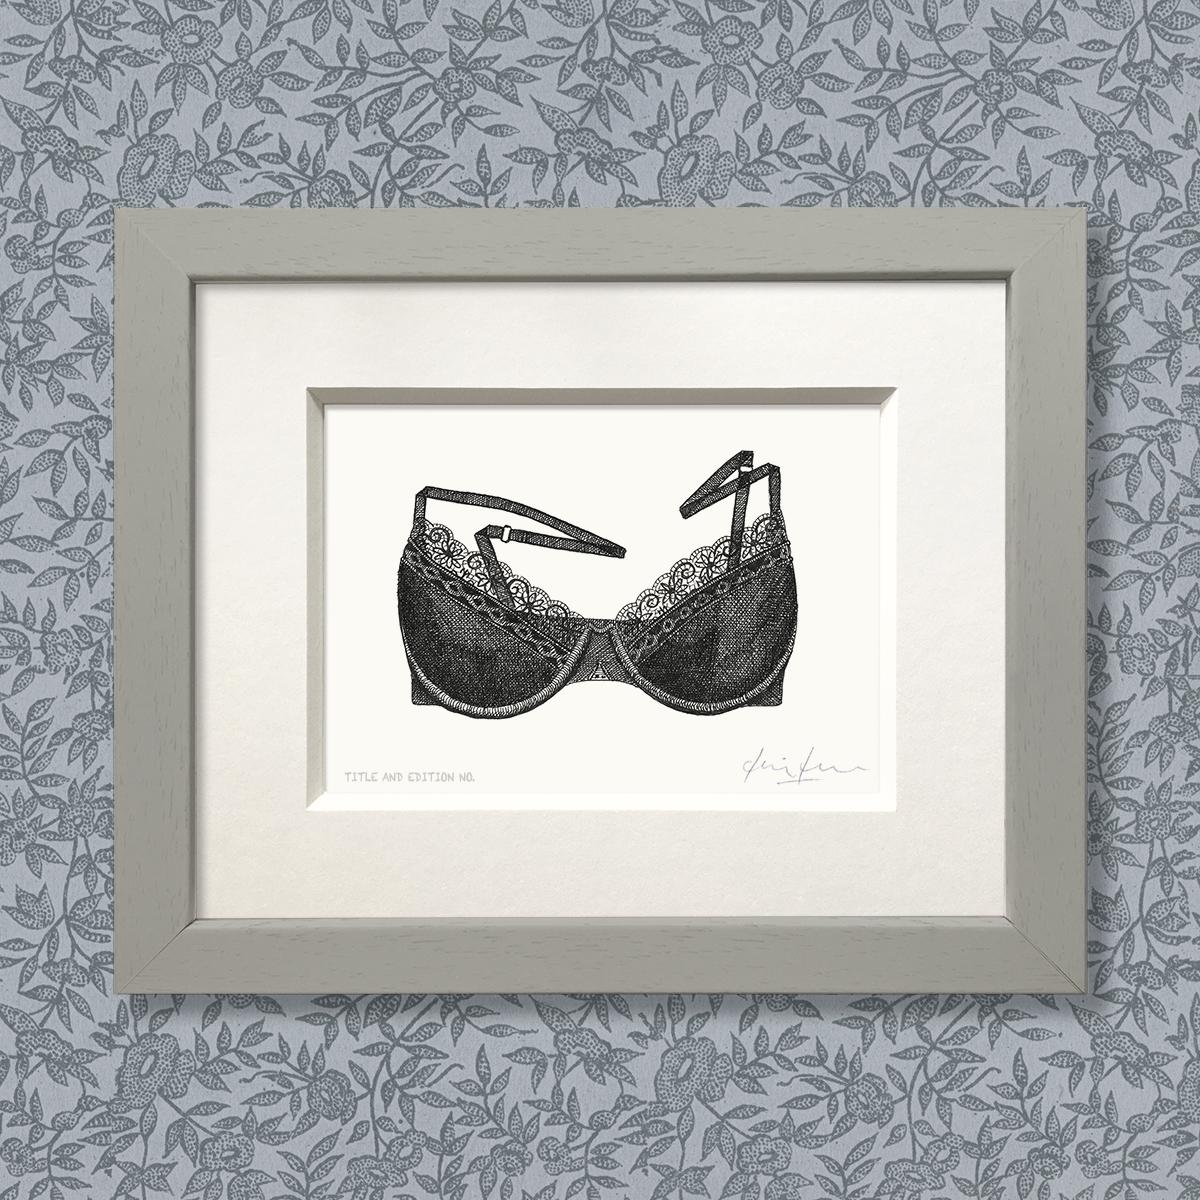 Limited edition print from pen and ink drawing of a lacy bra in a grey frame